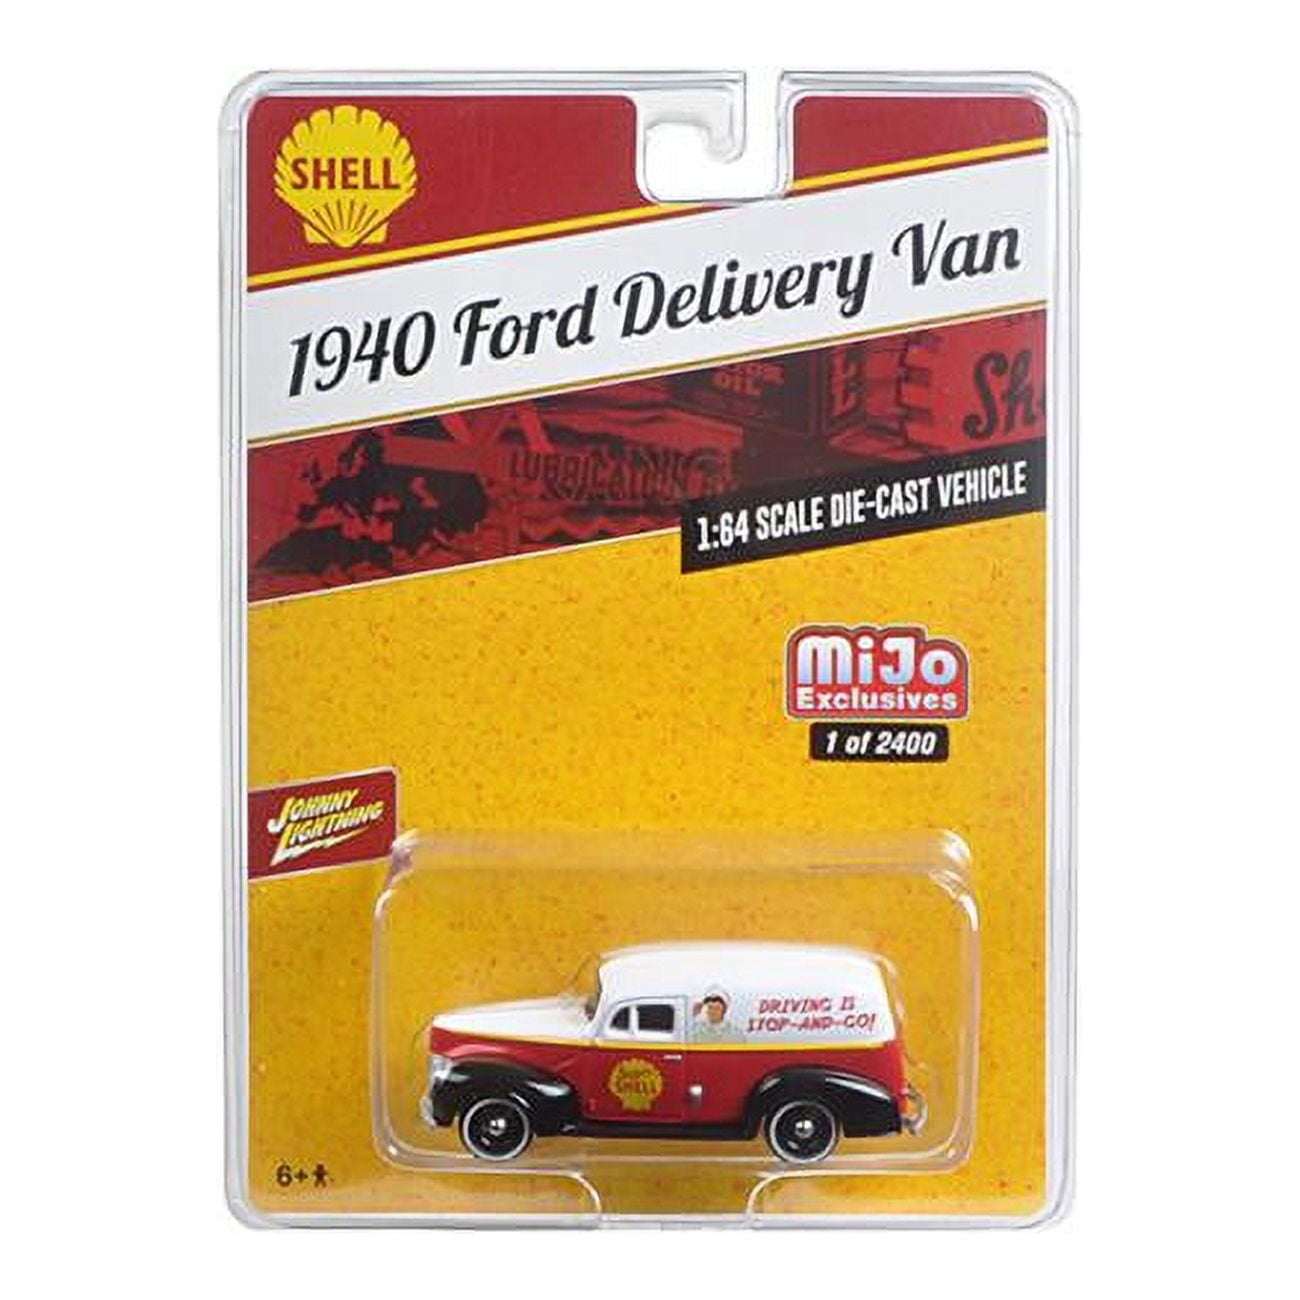 JLCP7016 1940 Ford Delivery Van Shell 1 by 64 Diecast Model Car -  JOHNNY LIGHTNING